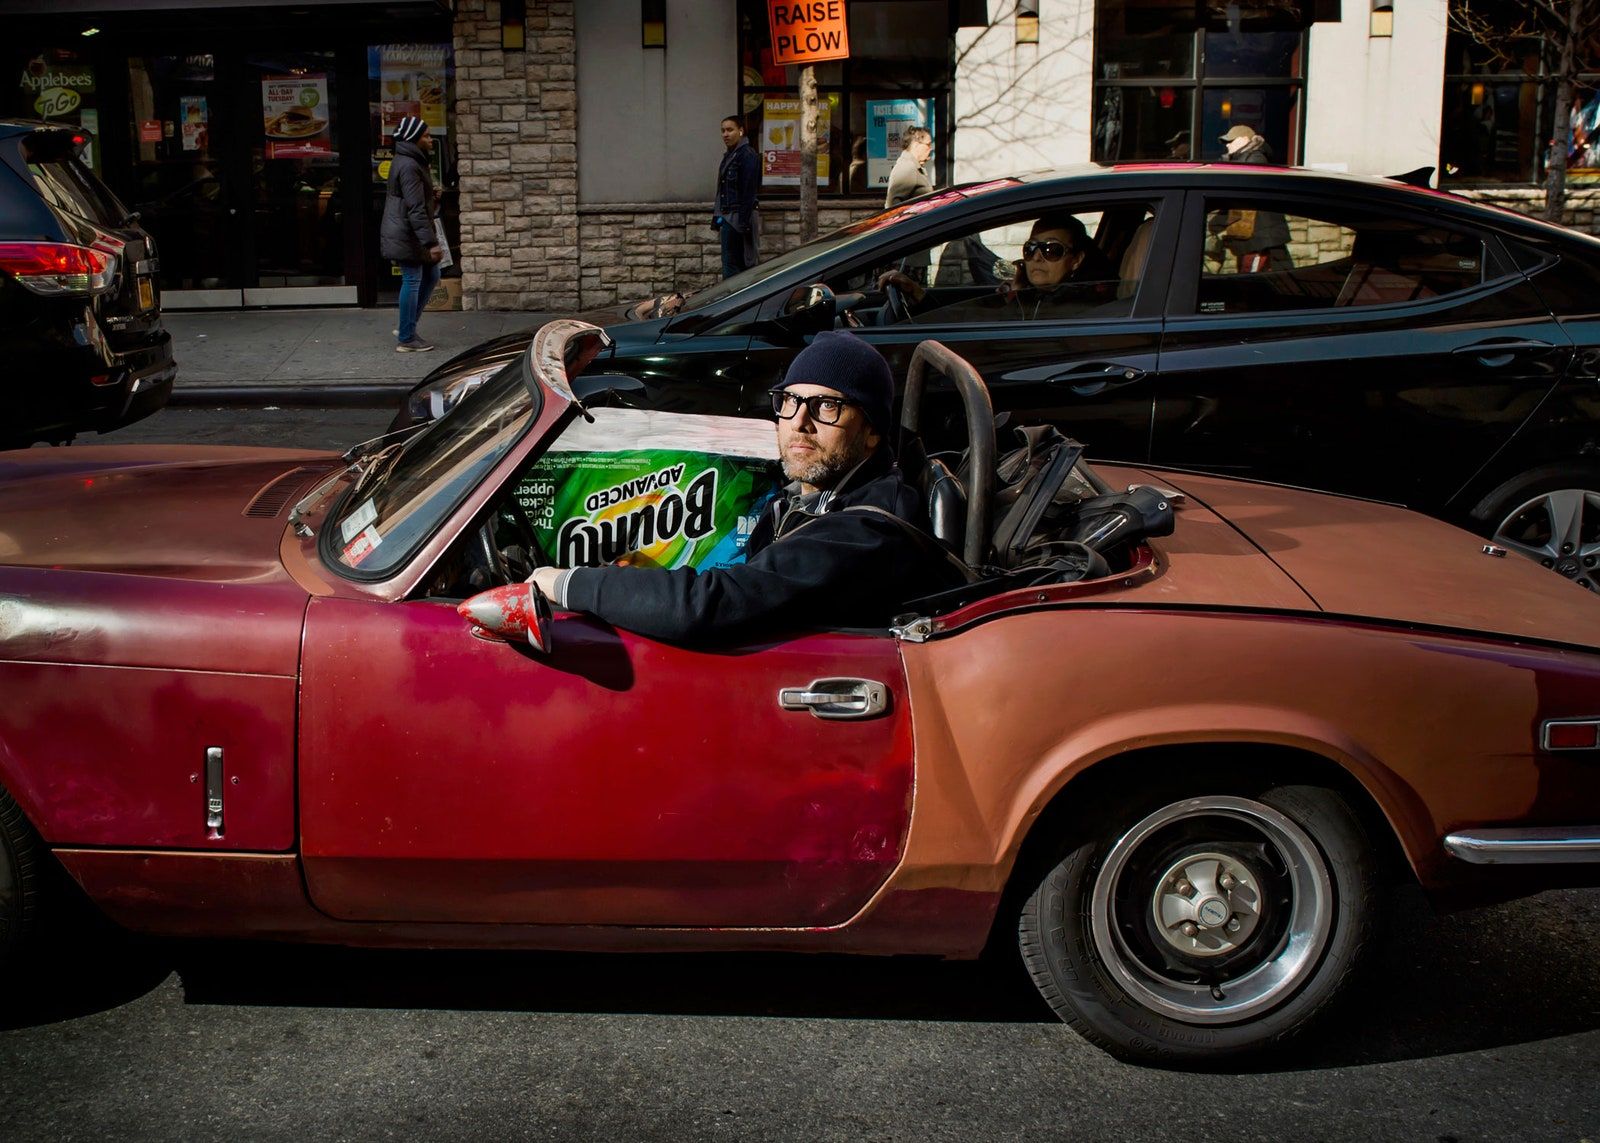 Convertible driver with groceries